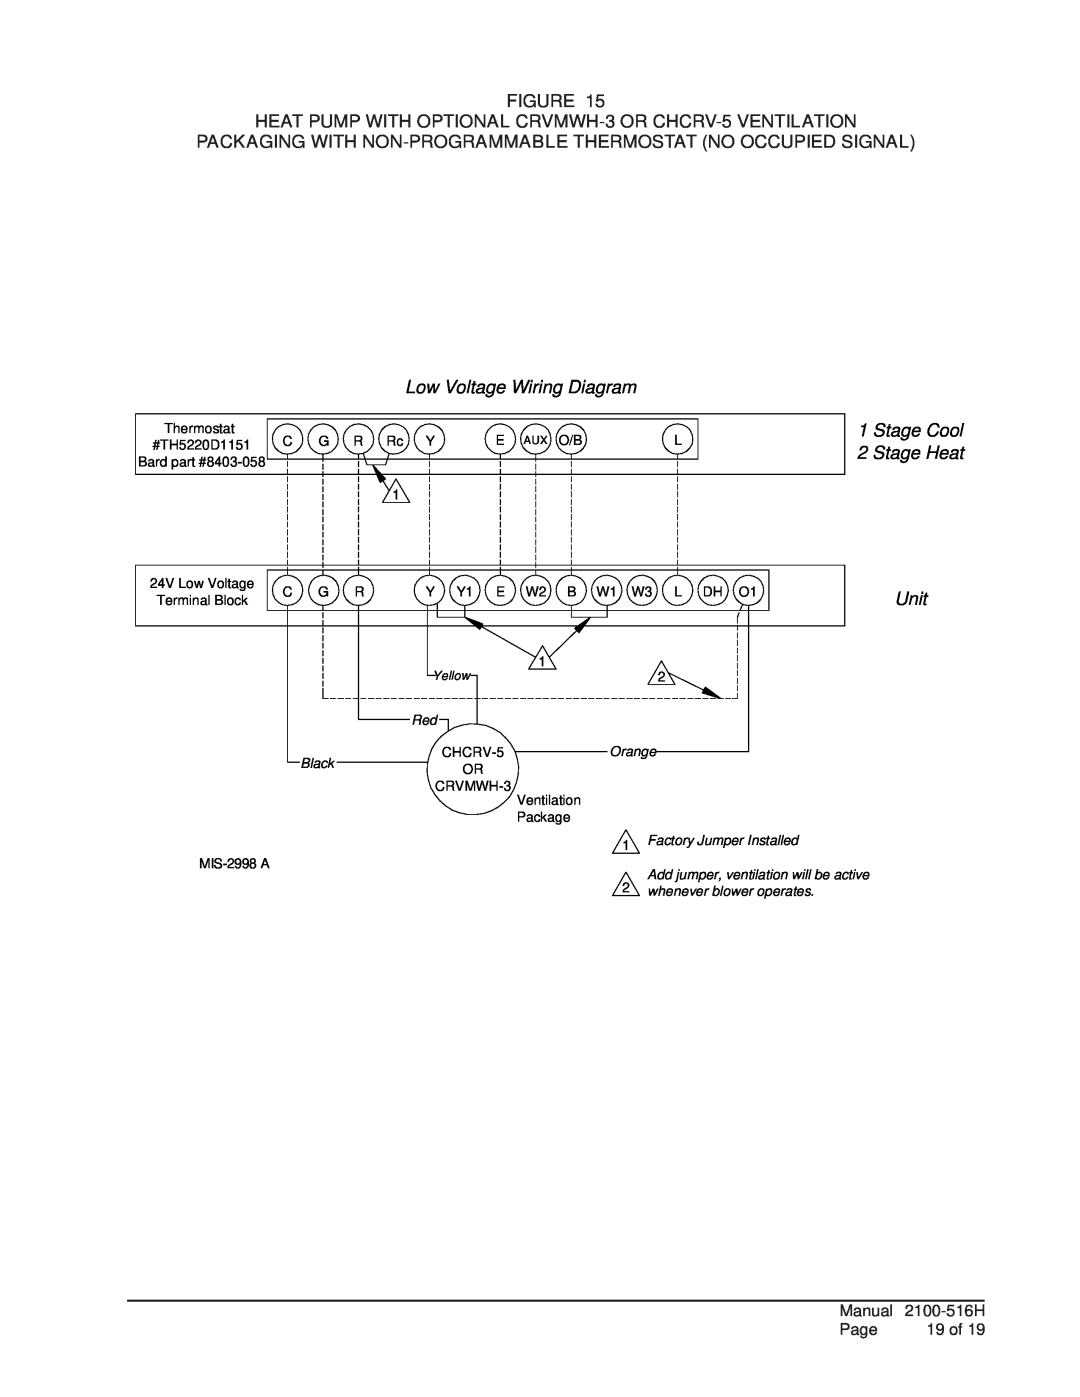 Bard W**H*D, S**H*D, T**H*D installation instructions Low Voltage Wiring Diagram, Stage Cool 2 Stage Heat Unit 